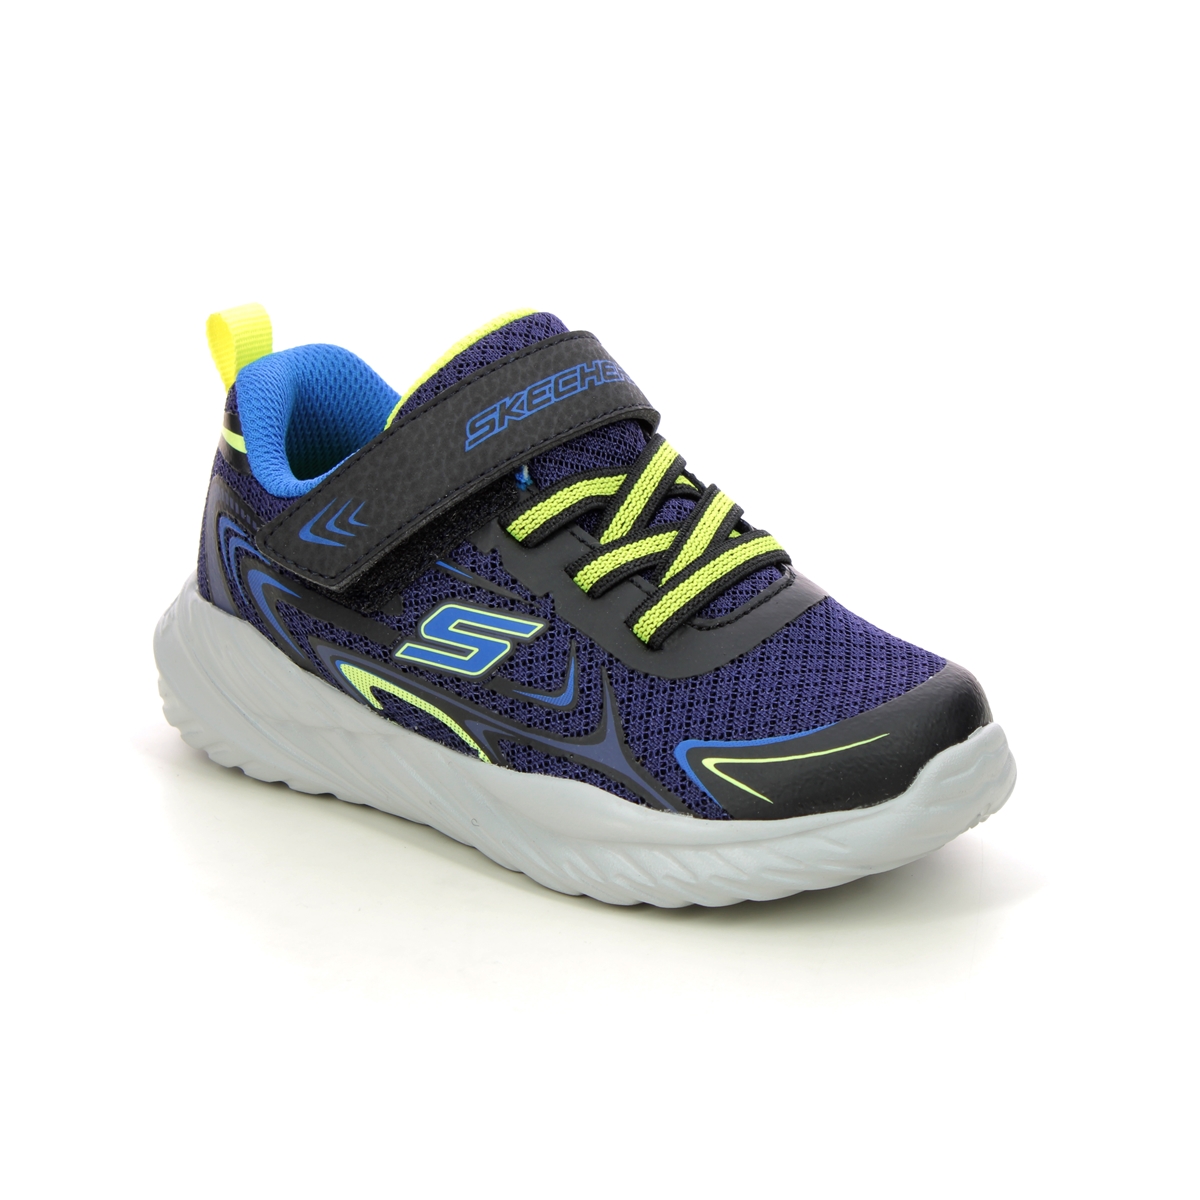 Skechers Lil Sprinter Navy Lime Kids Trainers 403887N In Size 26 In Plain Navy Lime For kids